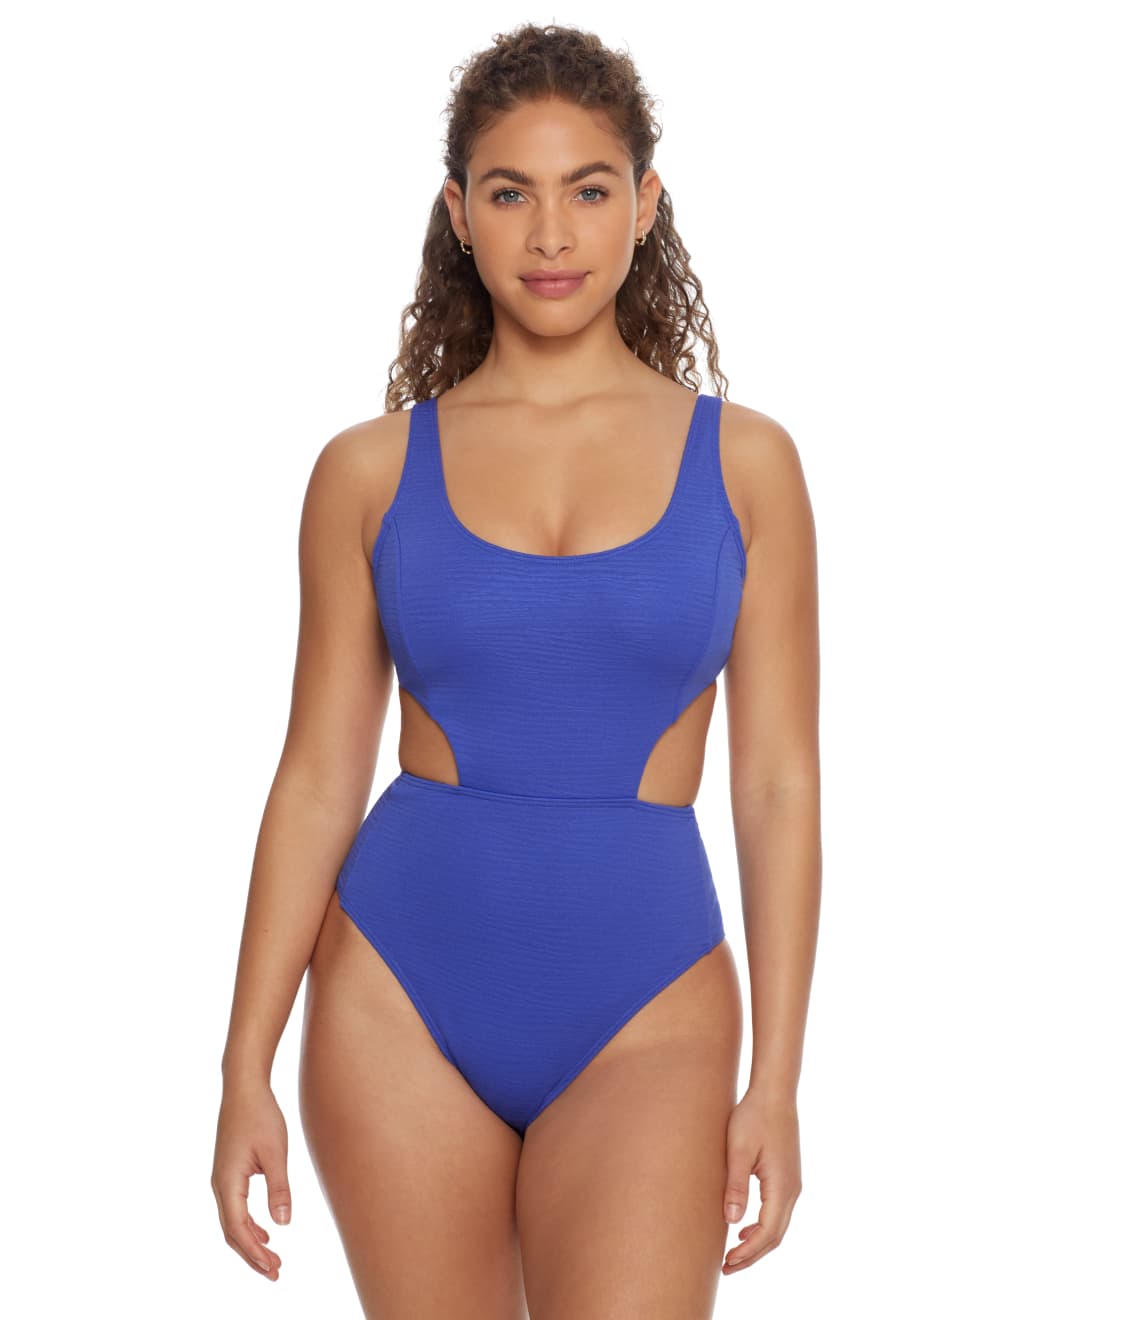 Bare: Cut-Out Underwire One-Piece S10293